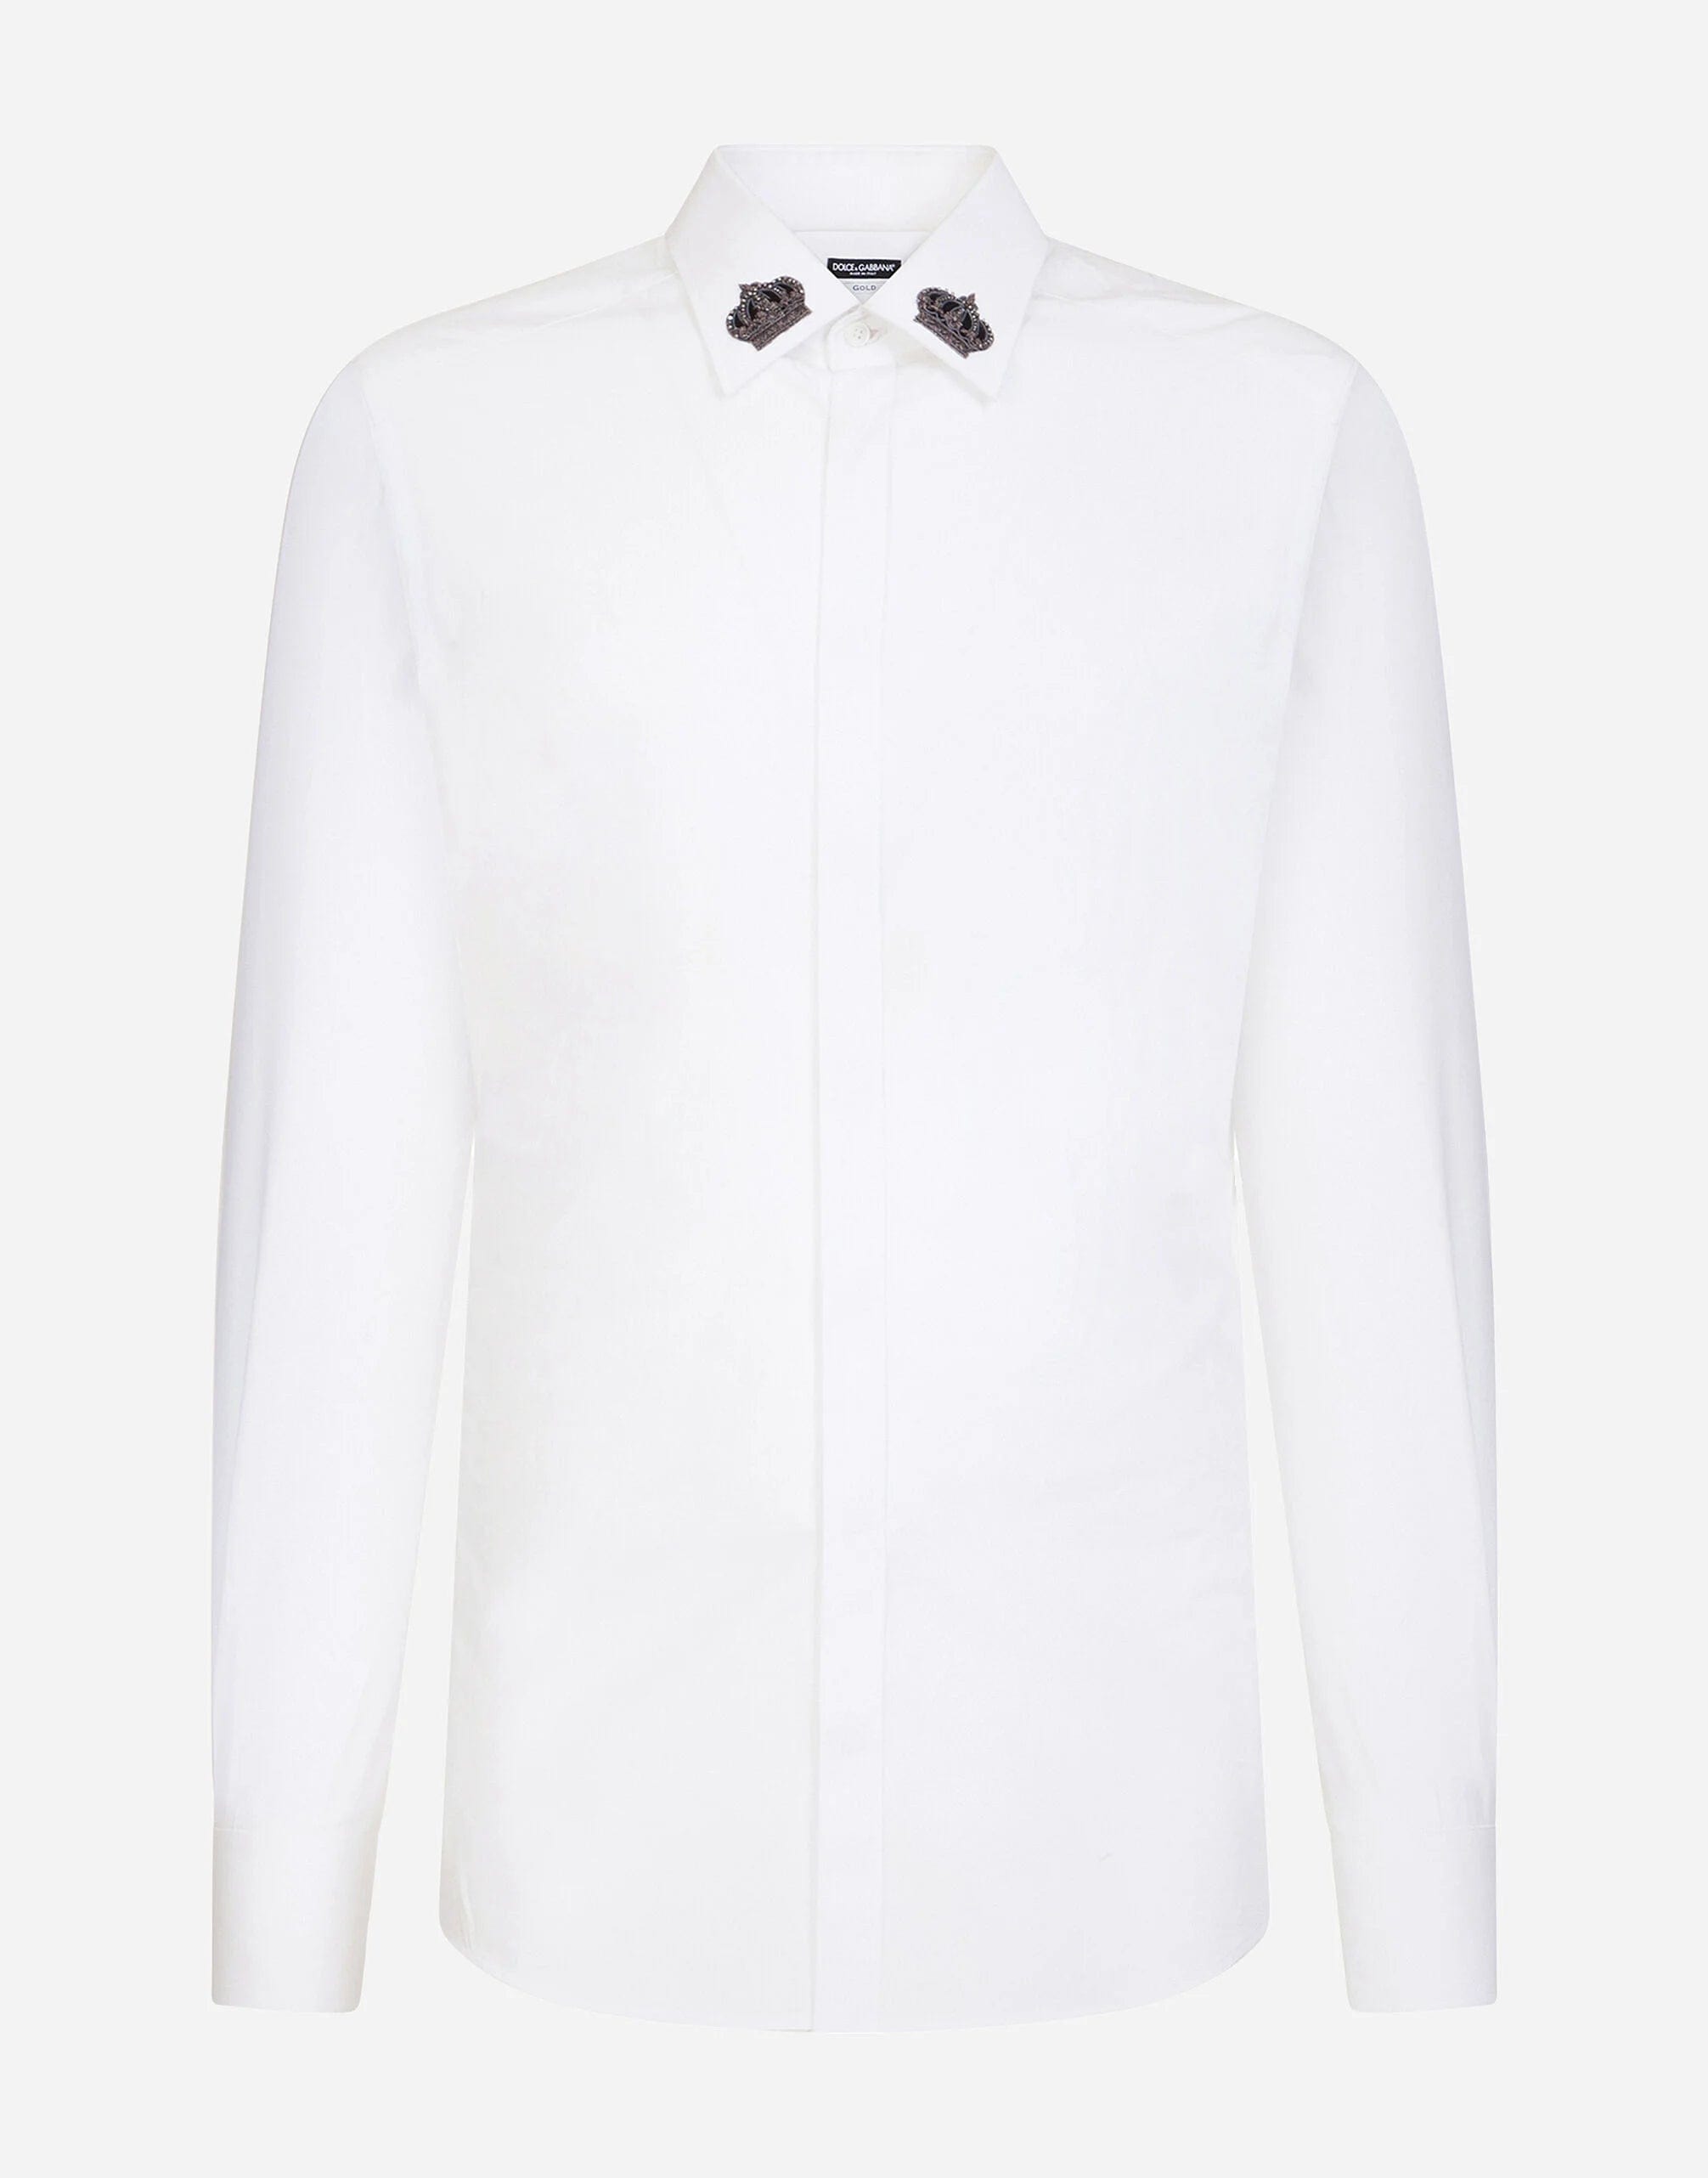 Dolce & Gabbana Cotton Gold Fit Shirt With Crown Patches